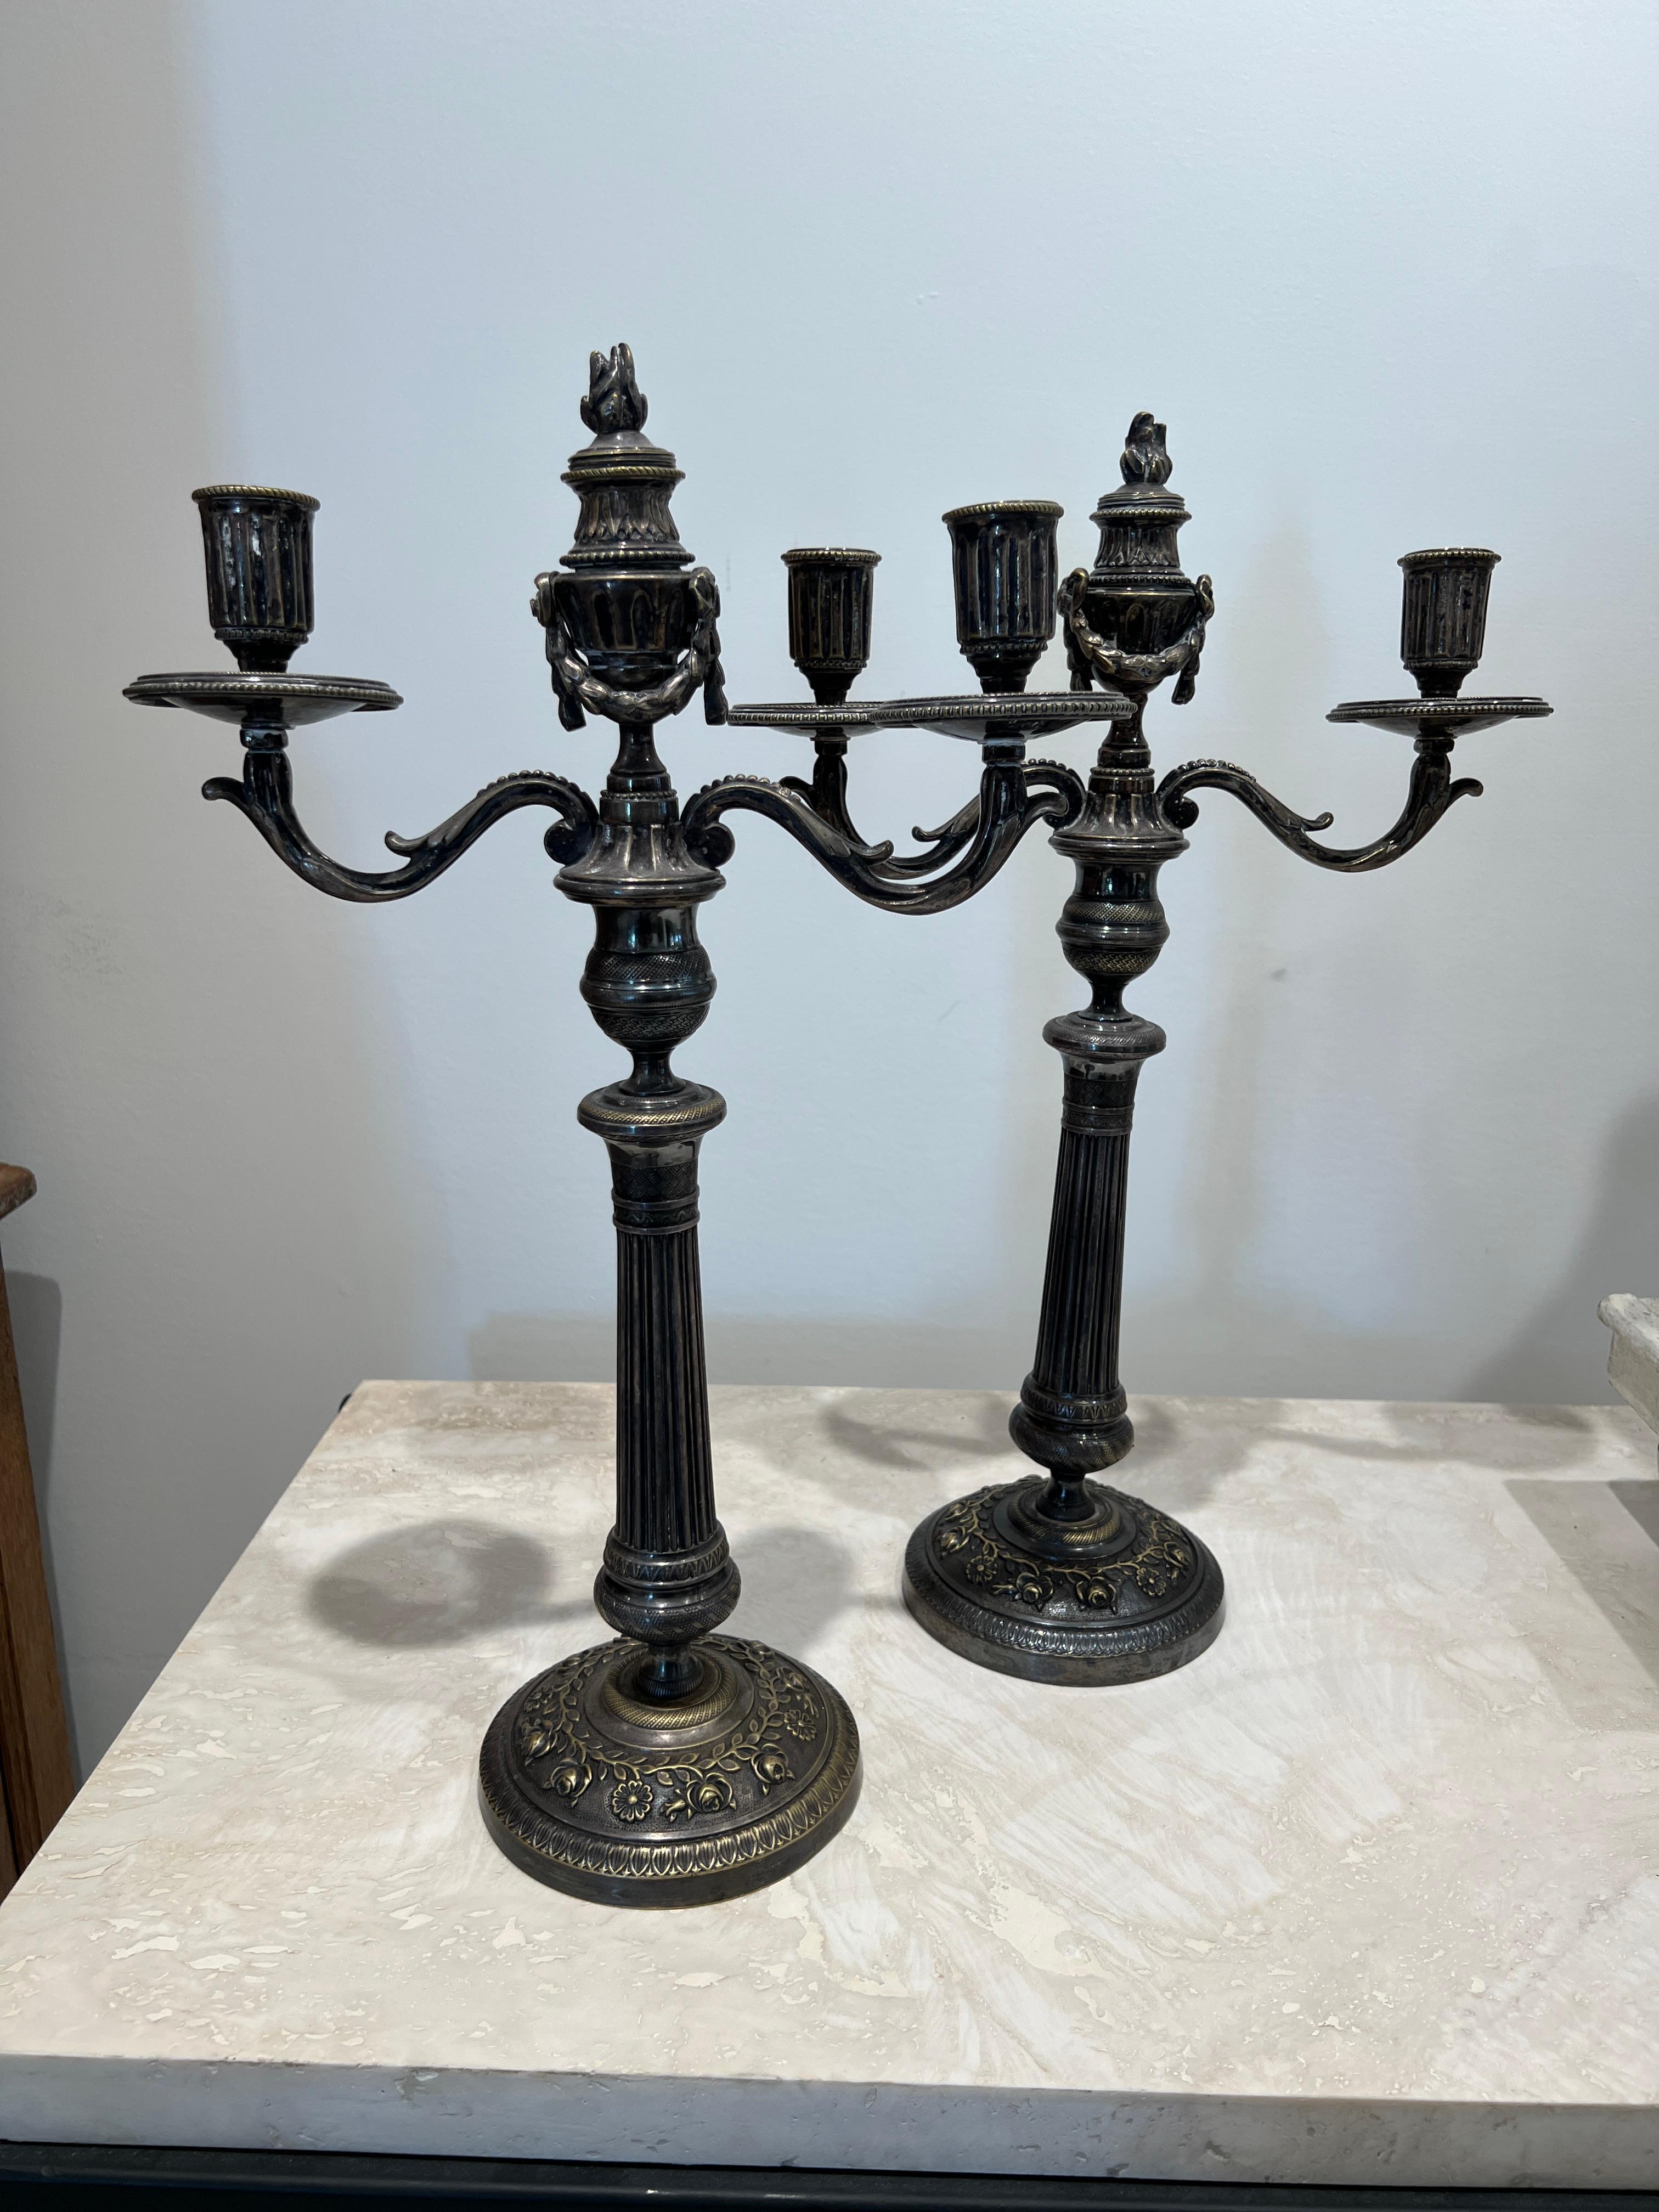 A matching pair of silver plated double candlesticks with an articulating decorative swag in the middle. Lovely lines, details and proportions for adding lighted tapers to your tablescape.